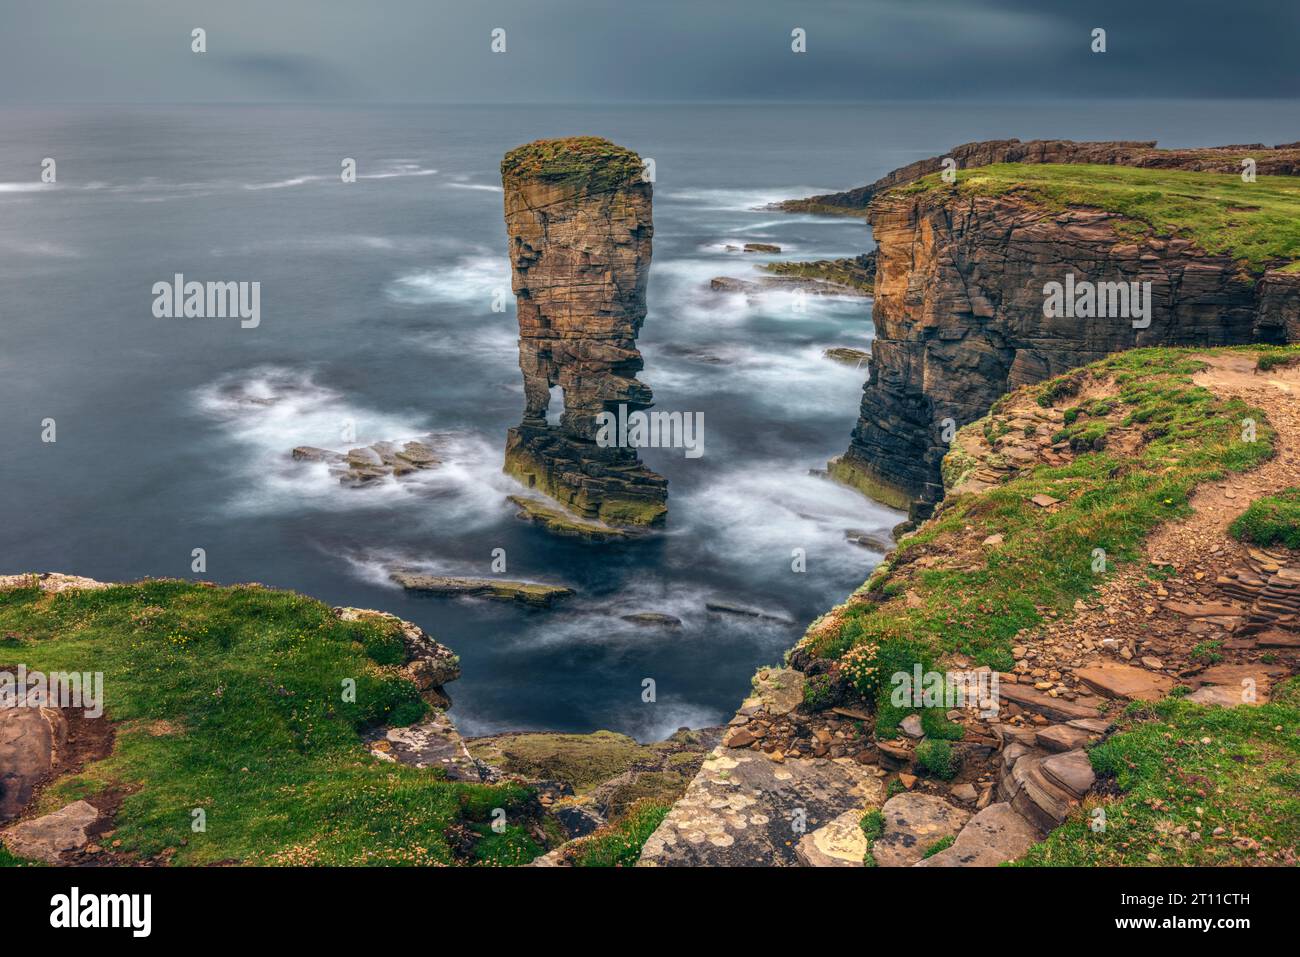 Yesnaby Castle is a famous two-legged sea stack near Sandwick on the Mainland in Orkney, Scotland. Stock Photo